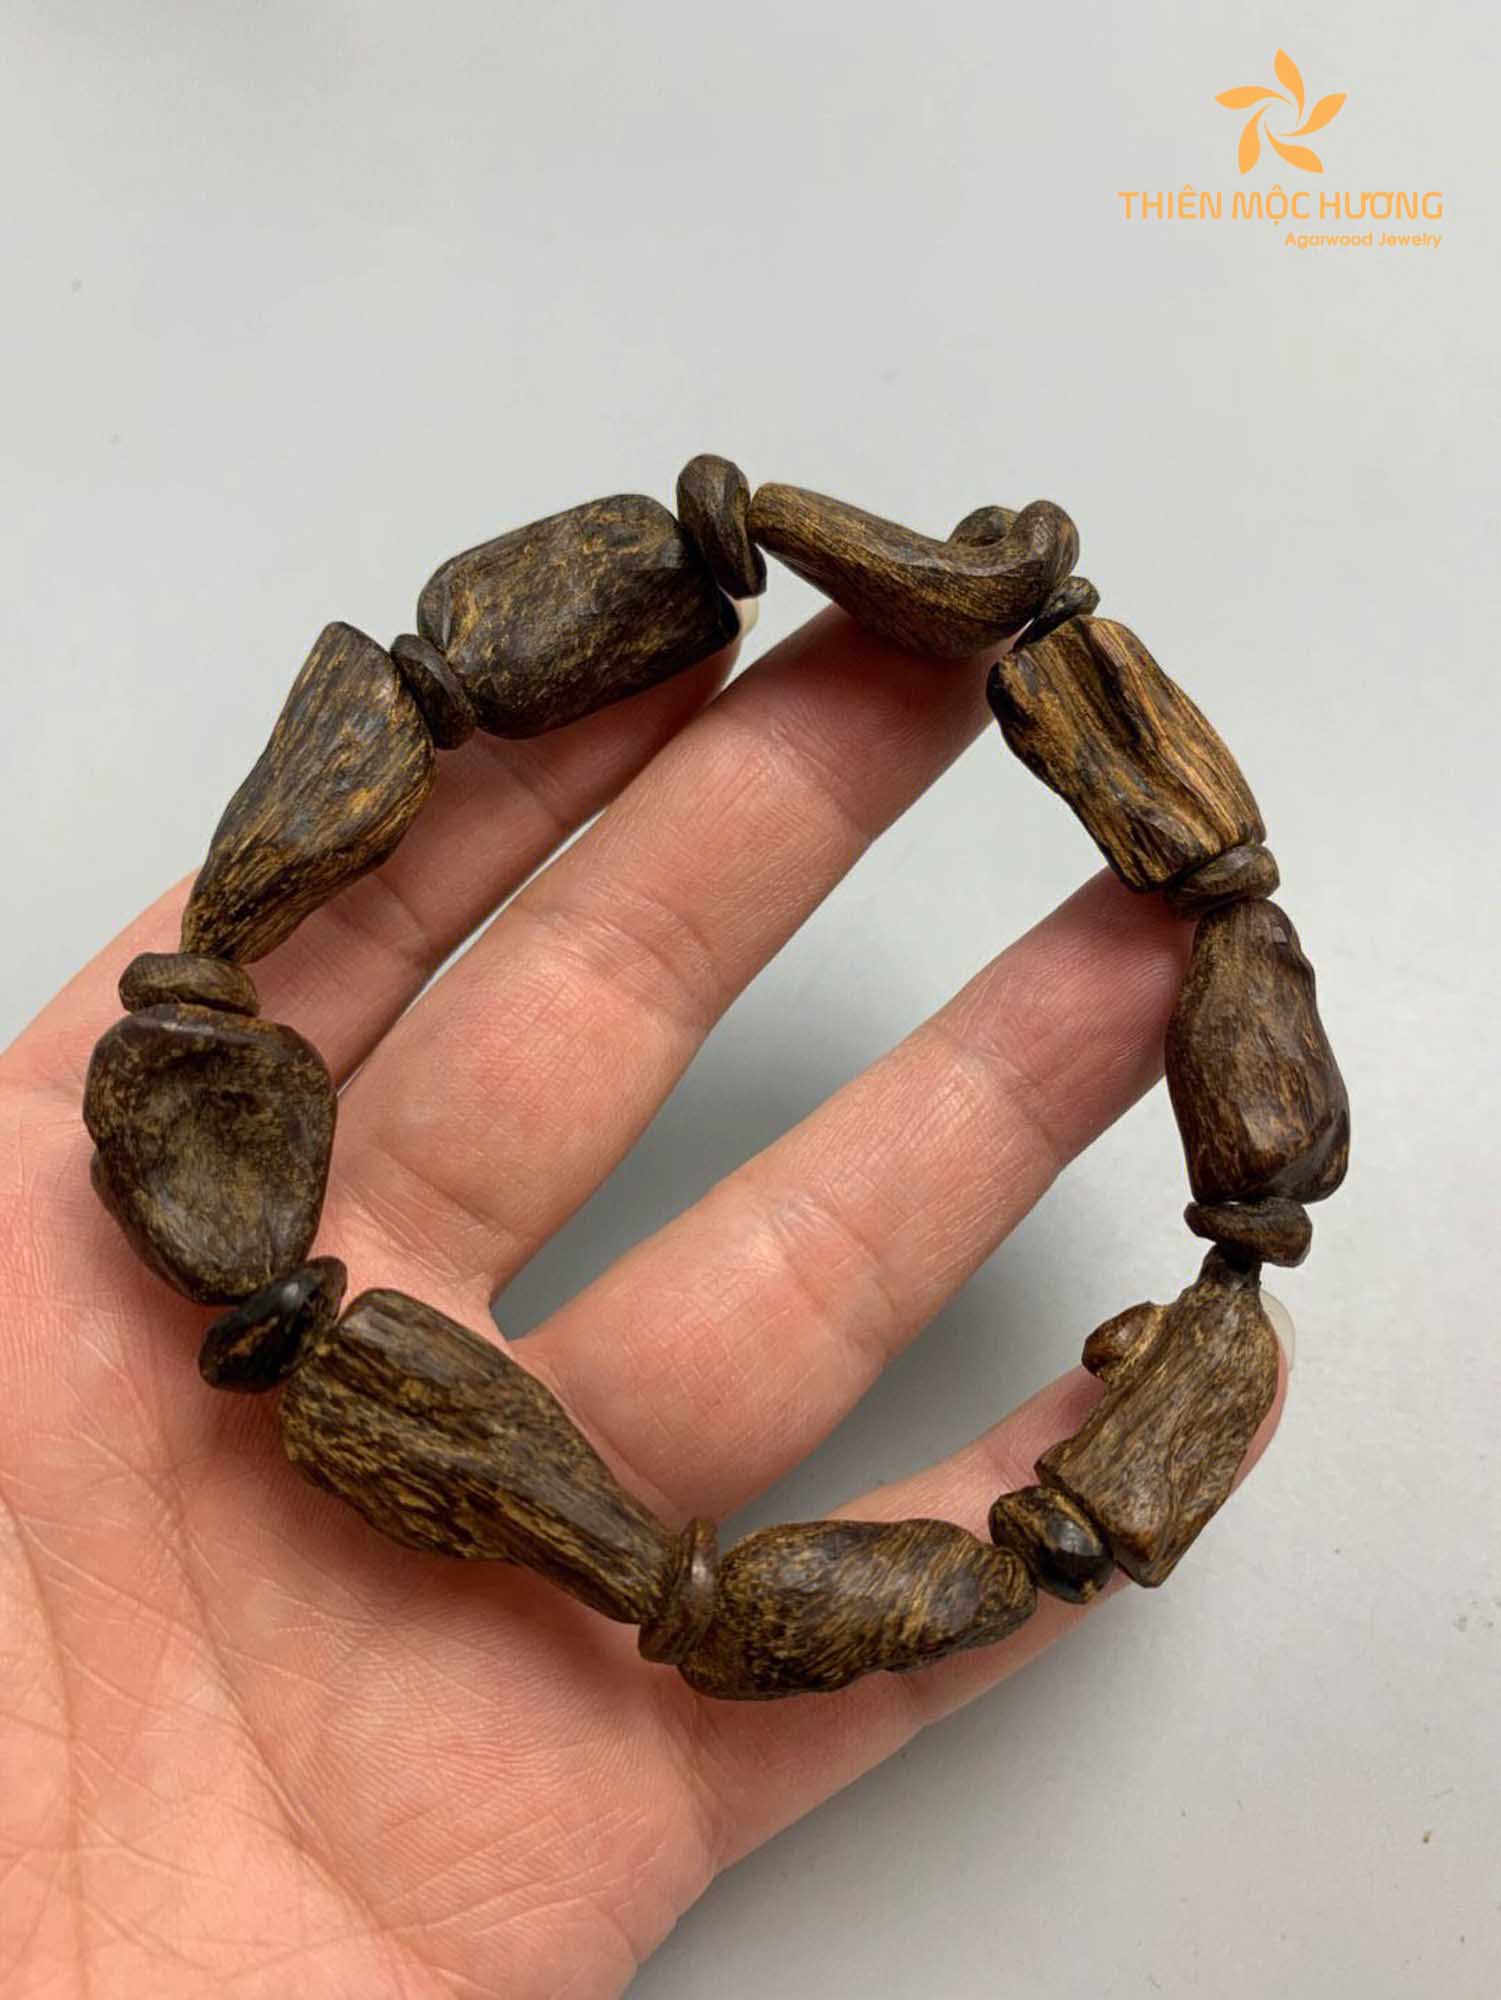 Factors Affecting the Value of Agarwood Bracelets - Rarity and availability